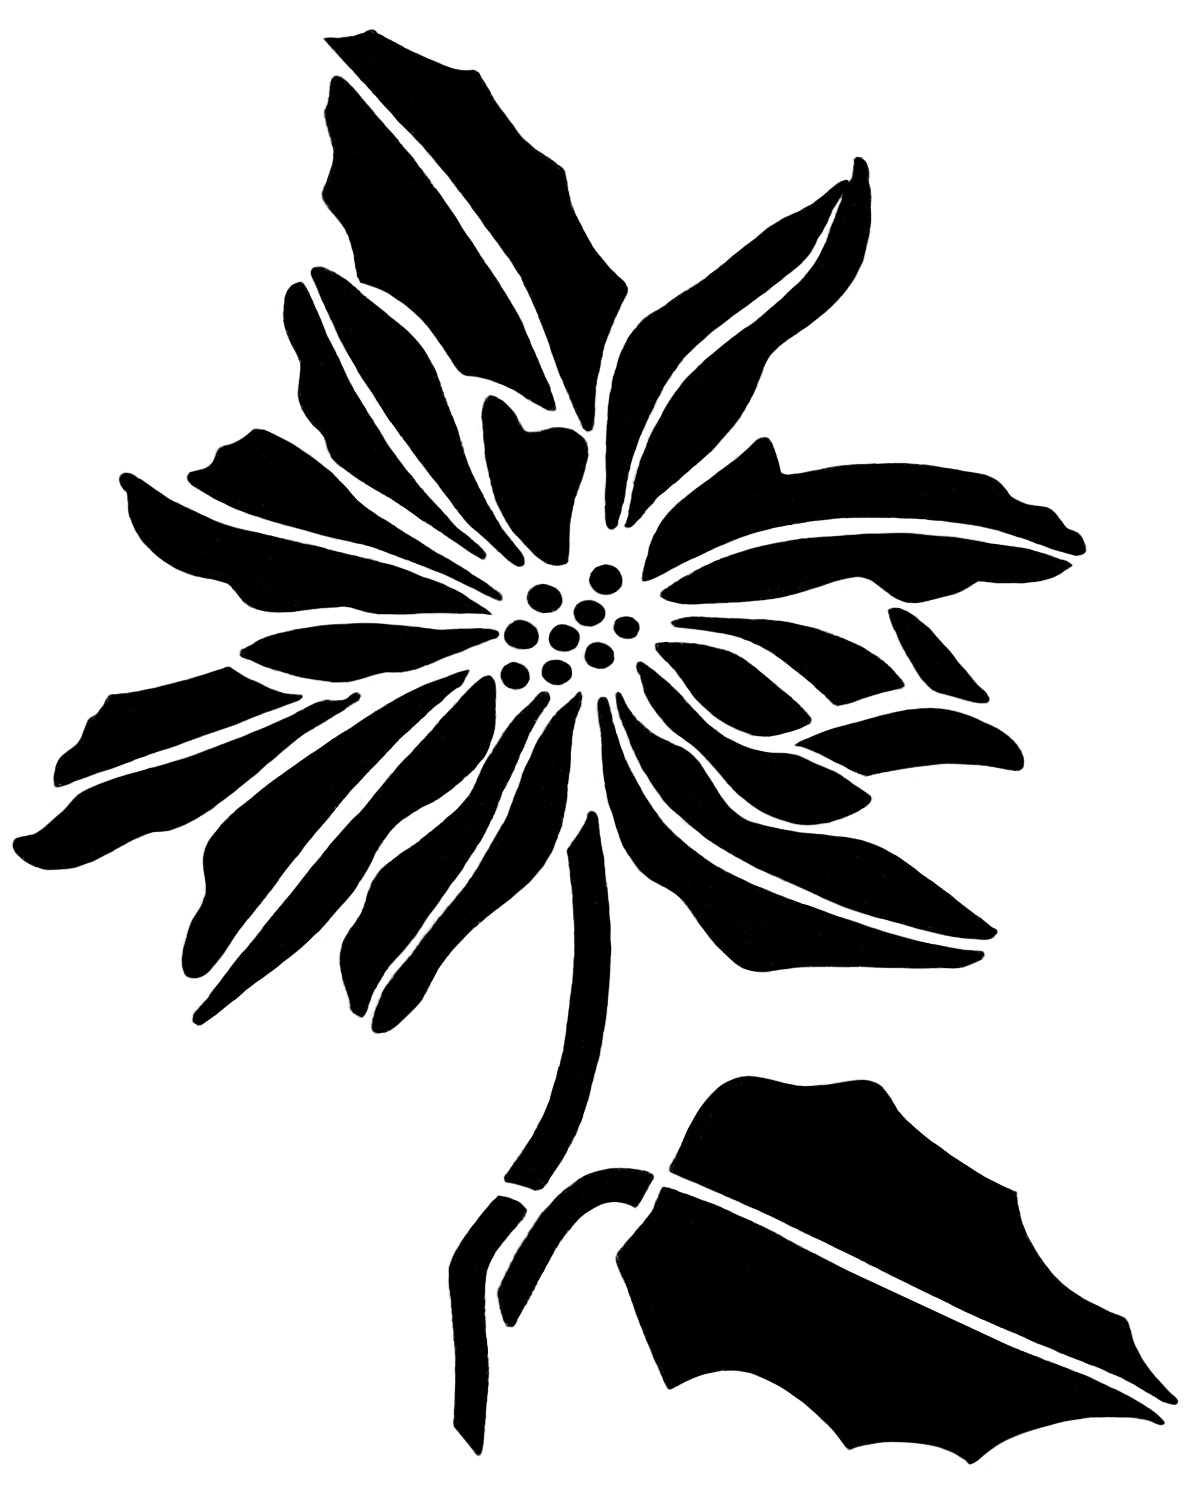 vintage Christmas clip art, poinsettia stencil, black and white graphics, Christmas flower illustration, floral digital stamp